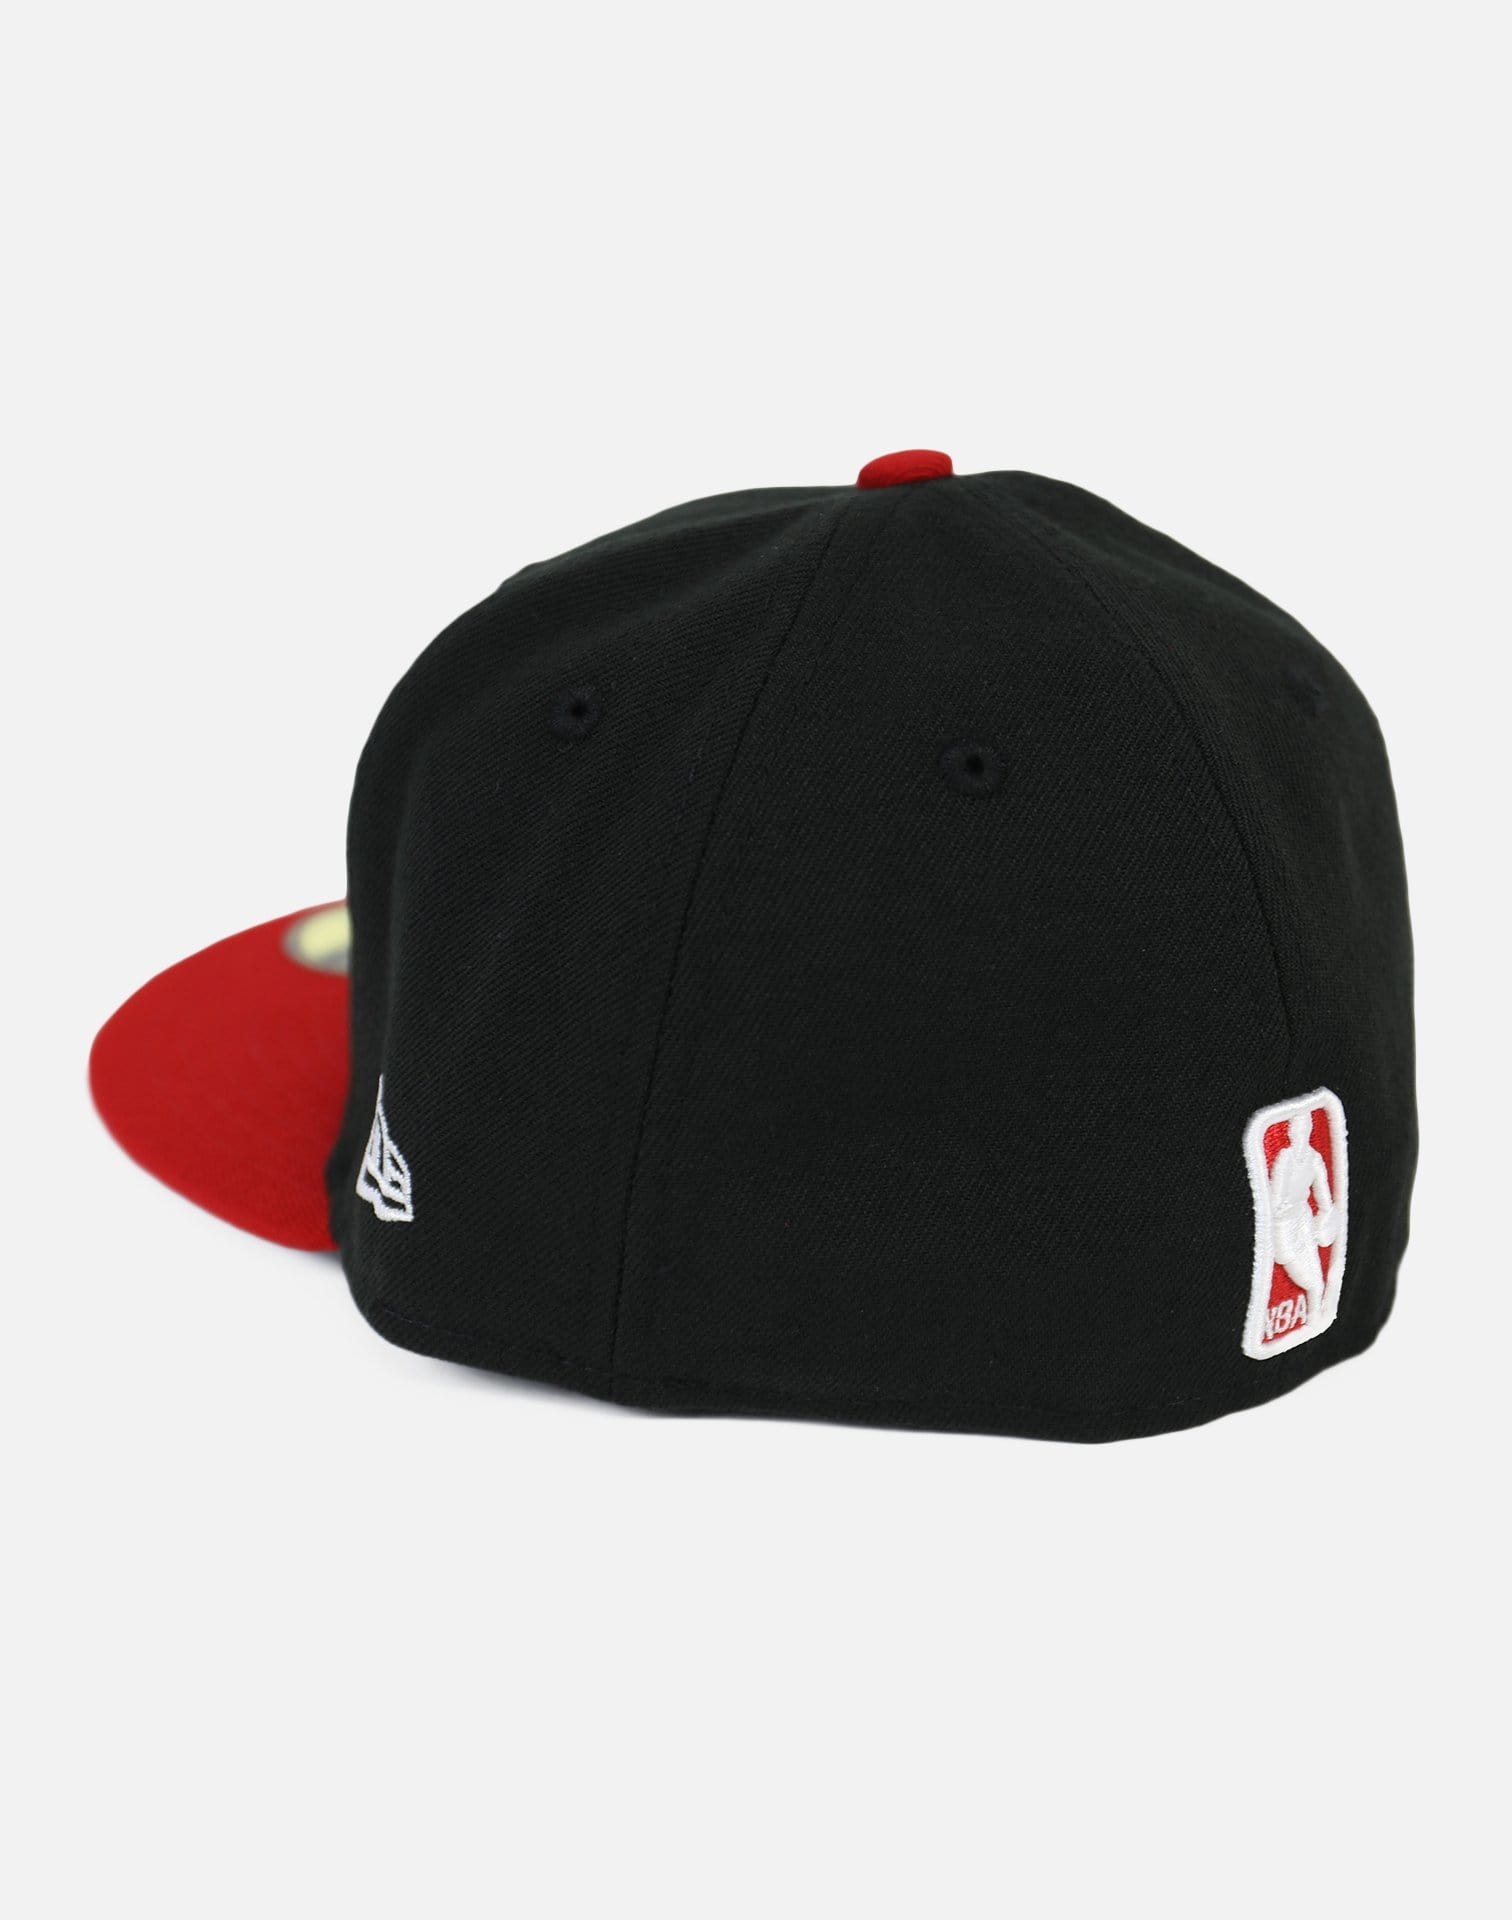 New Era Chicago Bulls Fitted Hat (Black/Red)